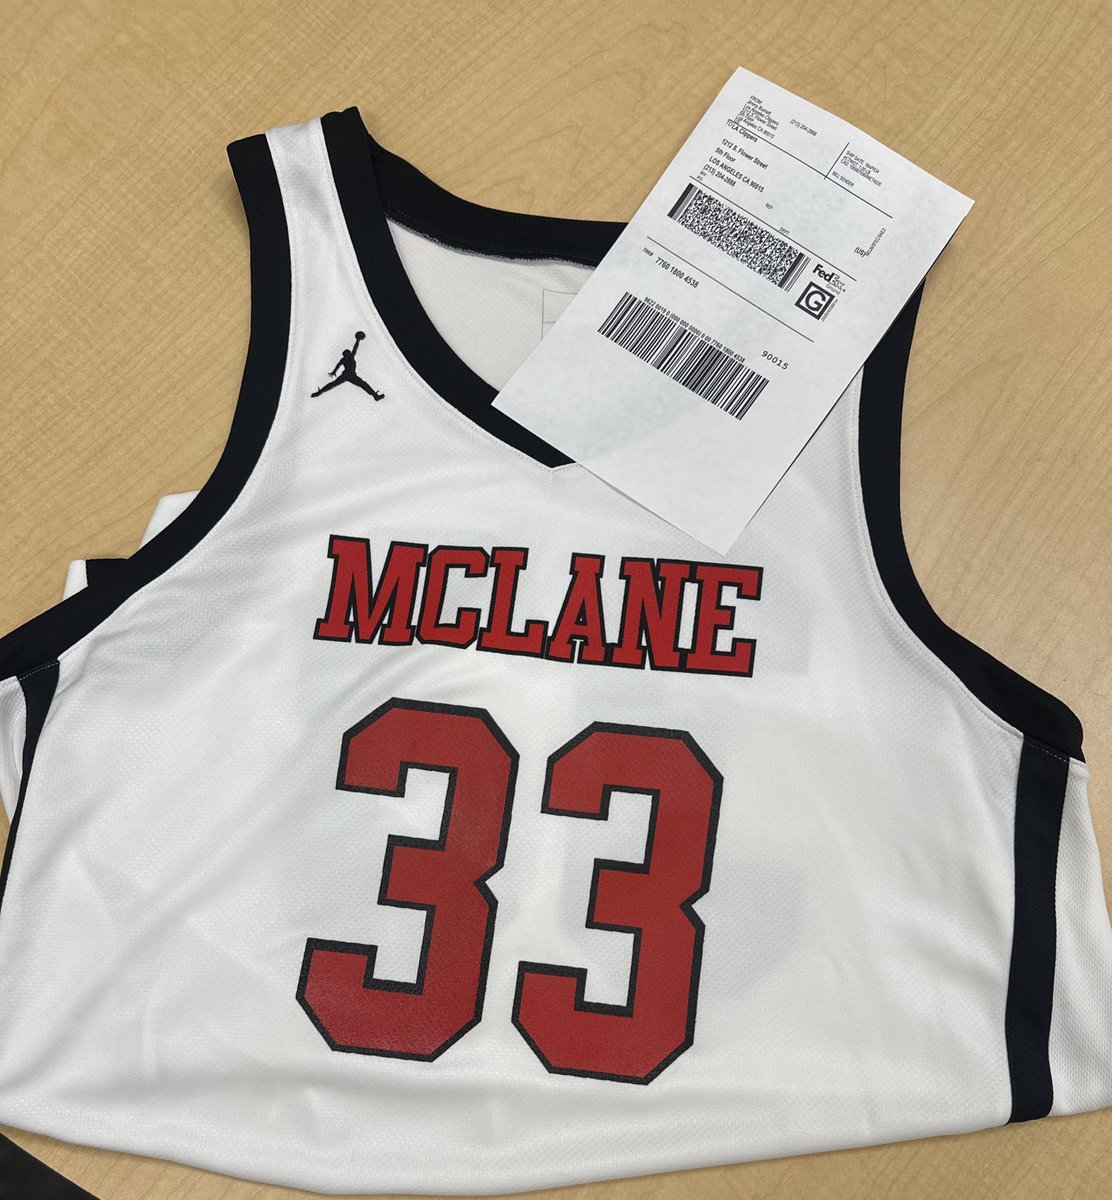 MHS #33 is headed to LA to be put up in the new Intuit Dome as part of the LA Clippers High School Jersey Project